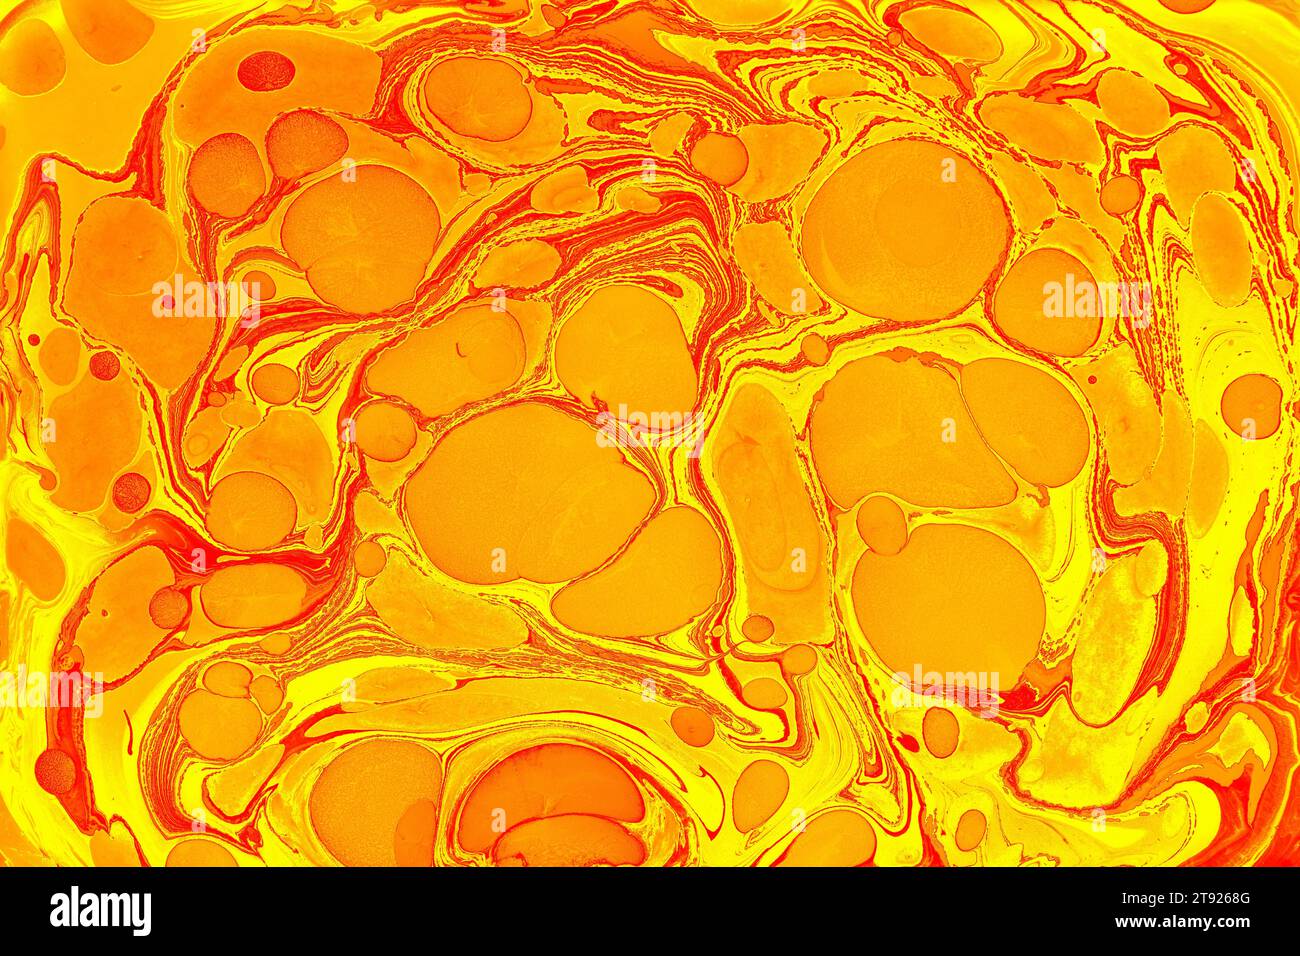 Abstract creative marbling pattern for fabric, design background texture Stock Photo